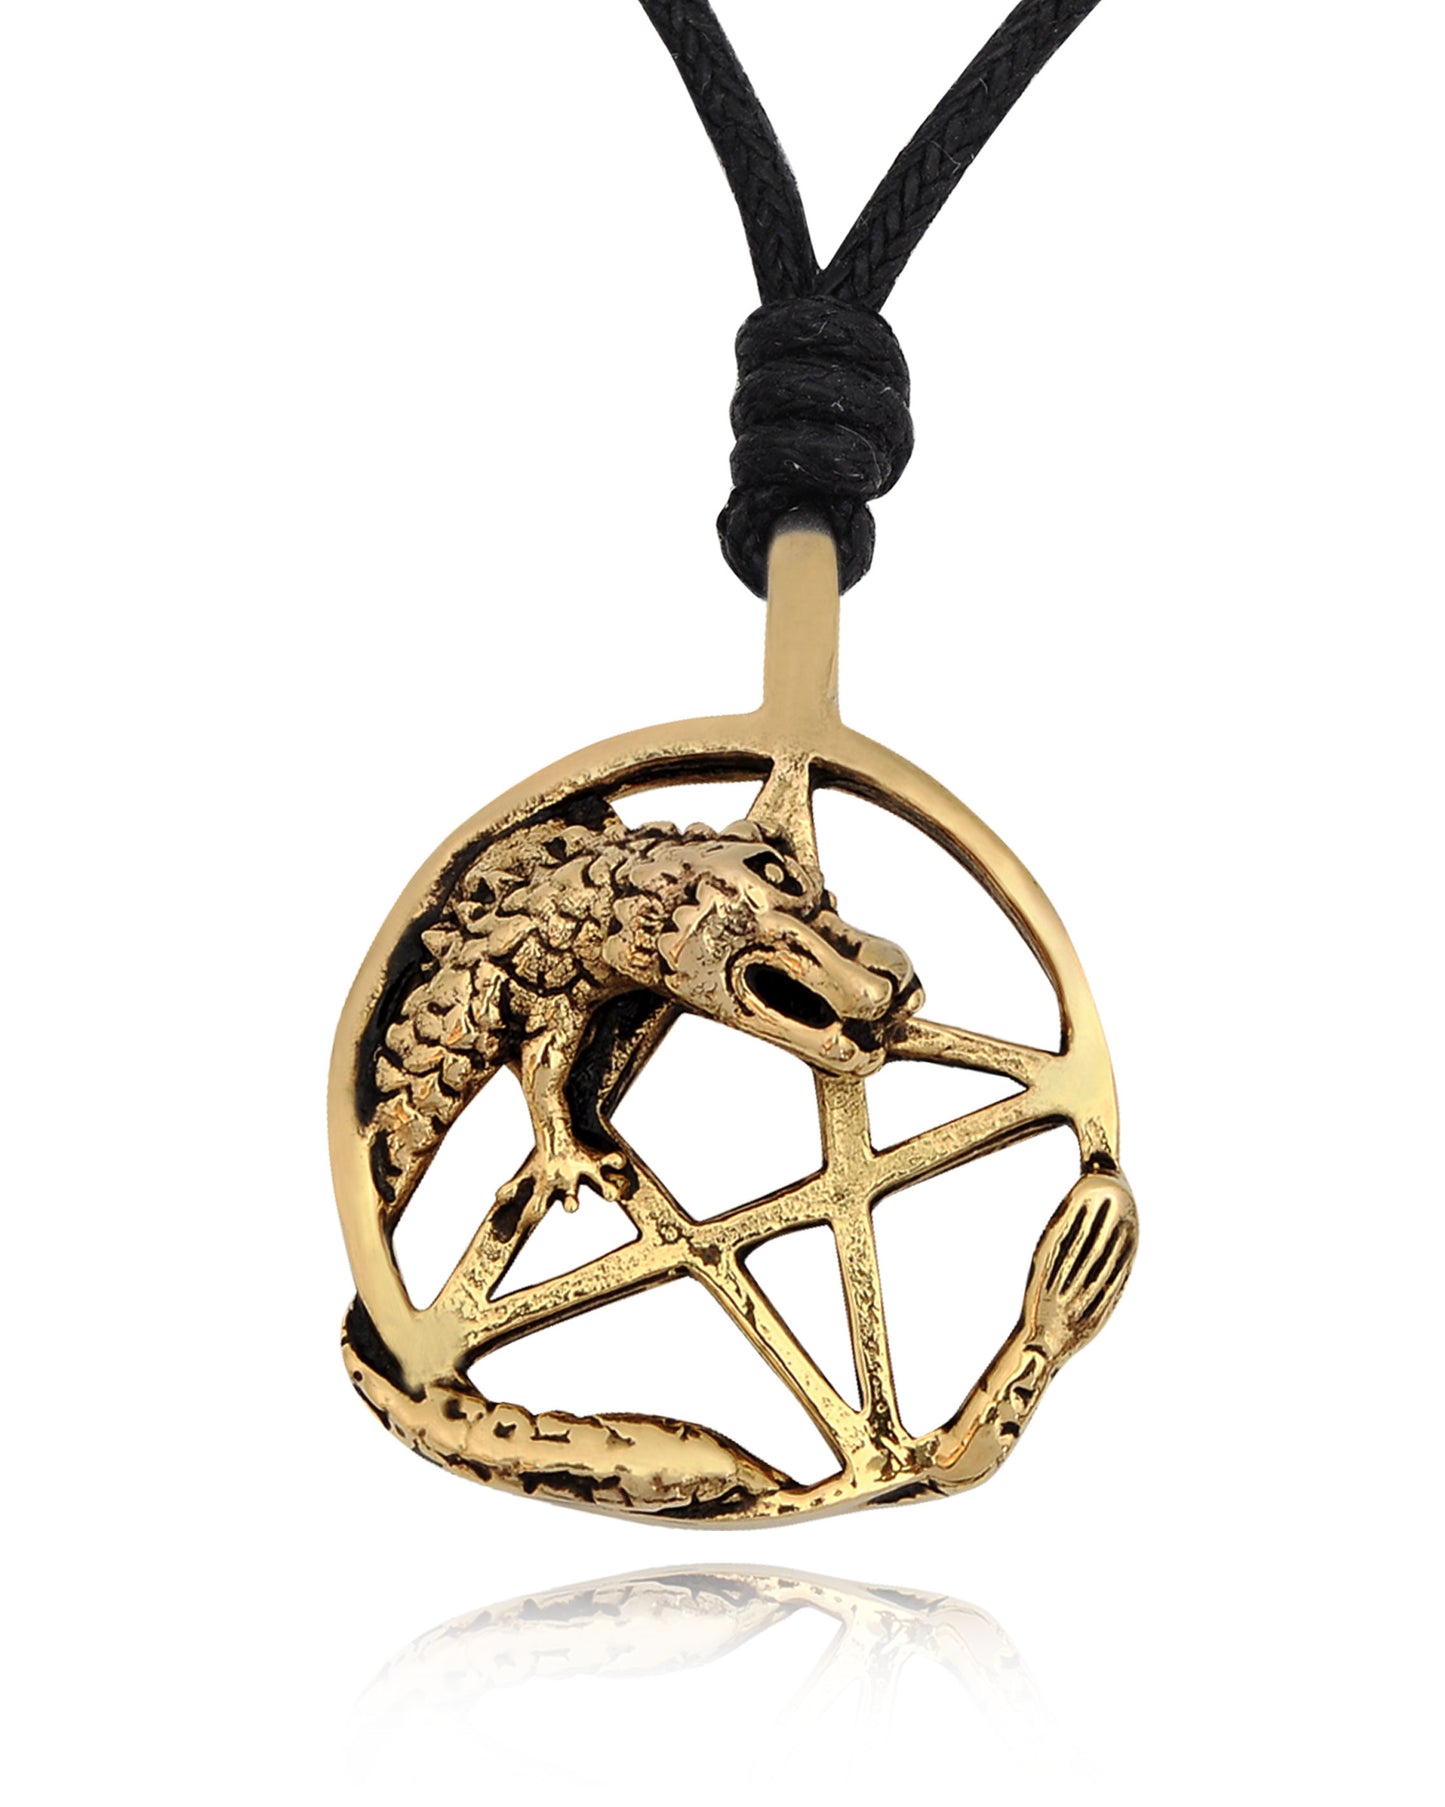 Lovely Dragon Pentagram Handmade Brass Charm Necklace Pendant Jewelry With Cotton Cord